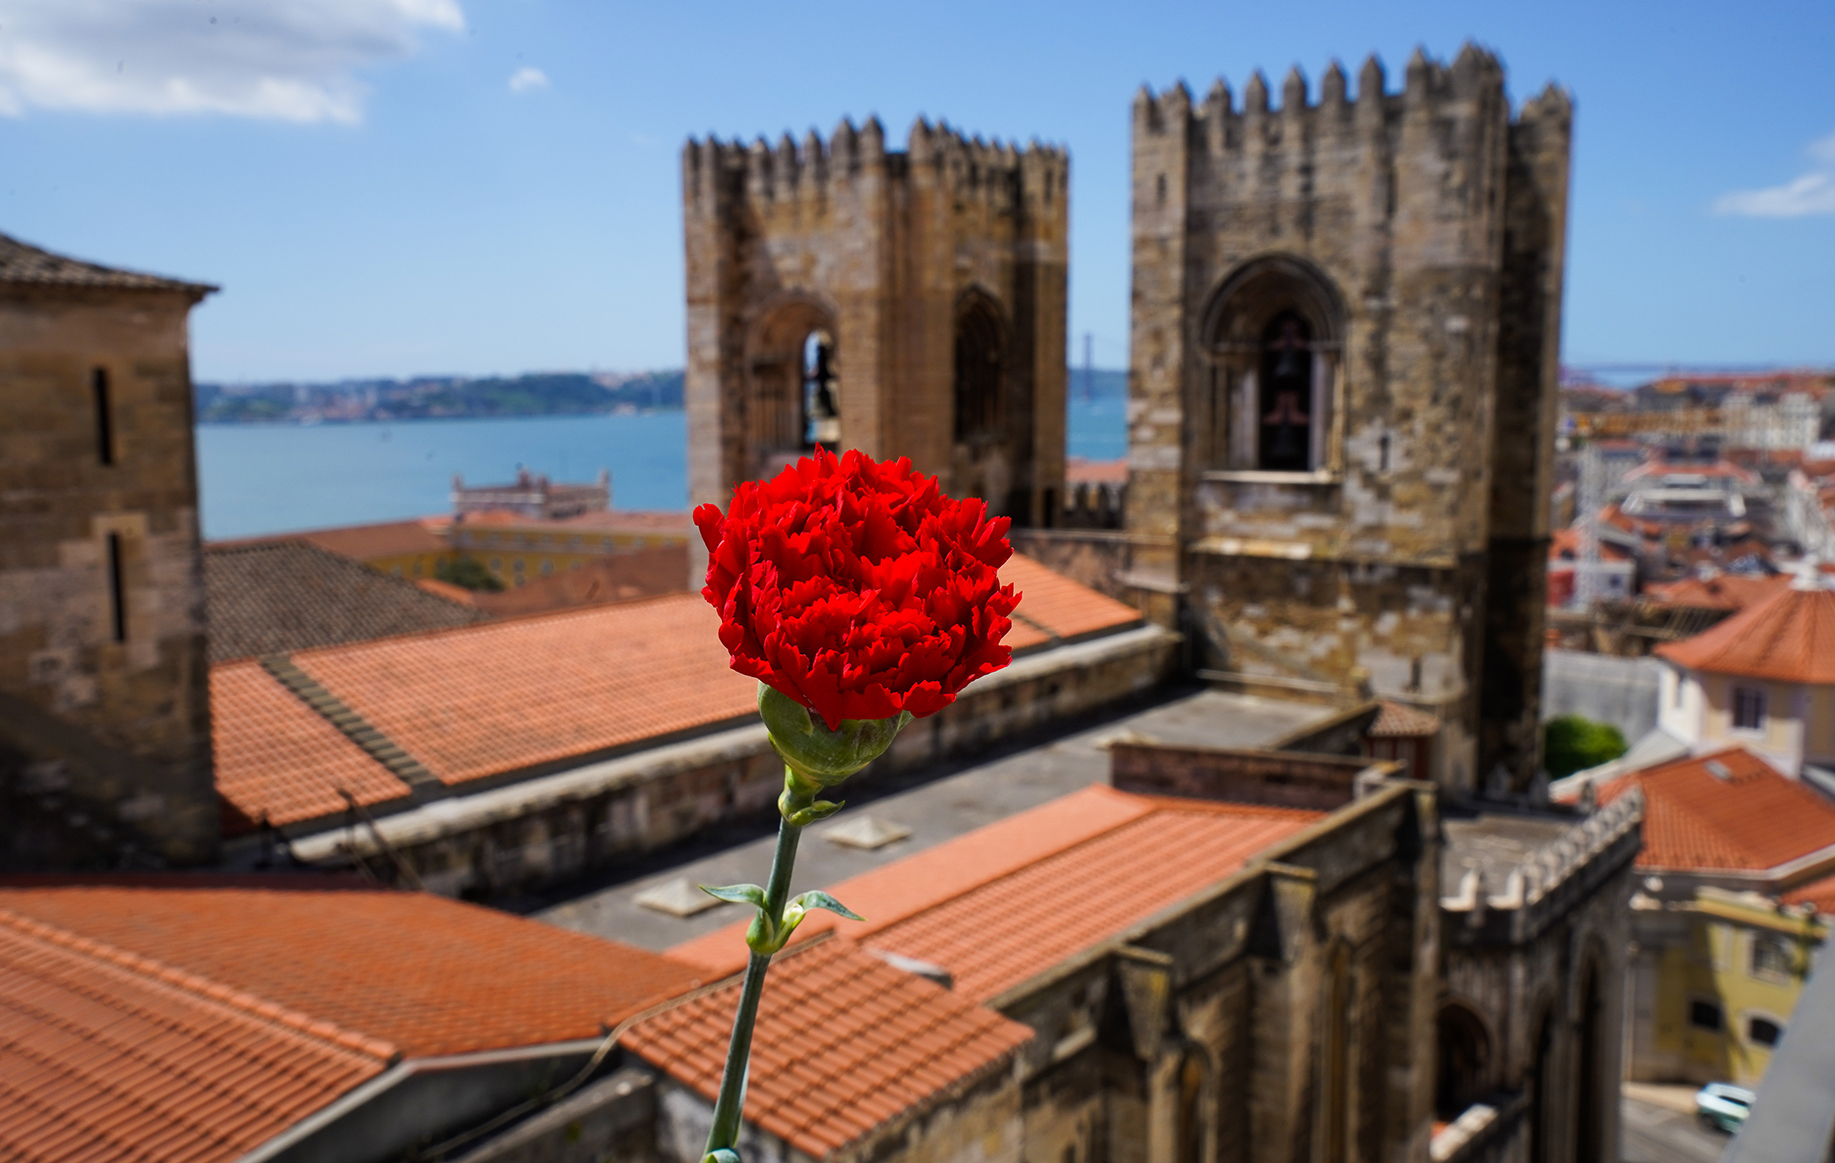  carnation in the foreground. In the background, the Tagus River, Lisbon Cathedral and rooftops